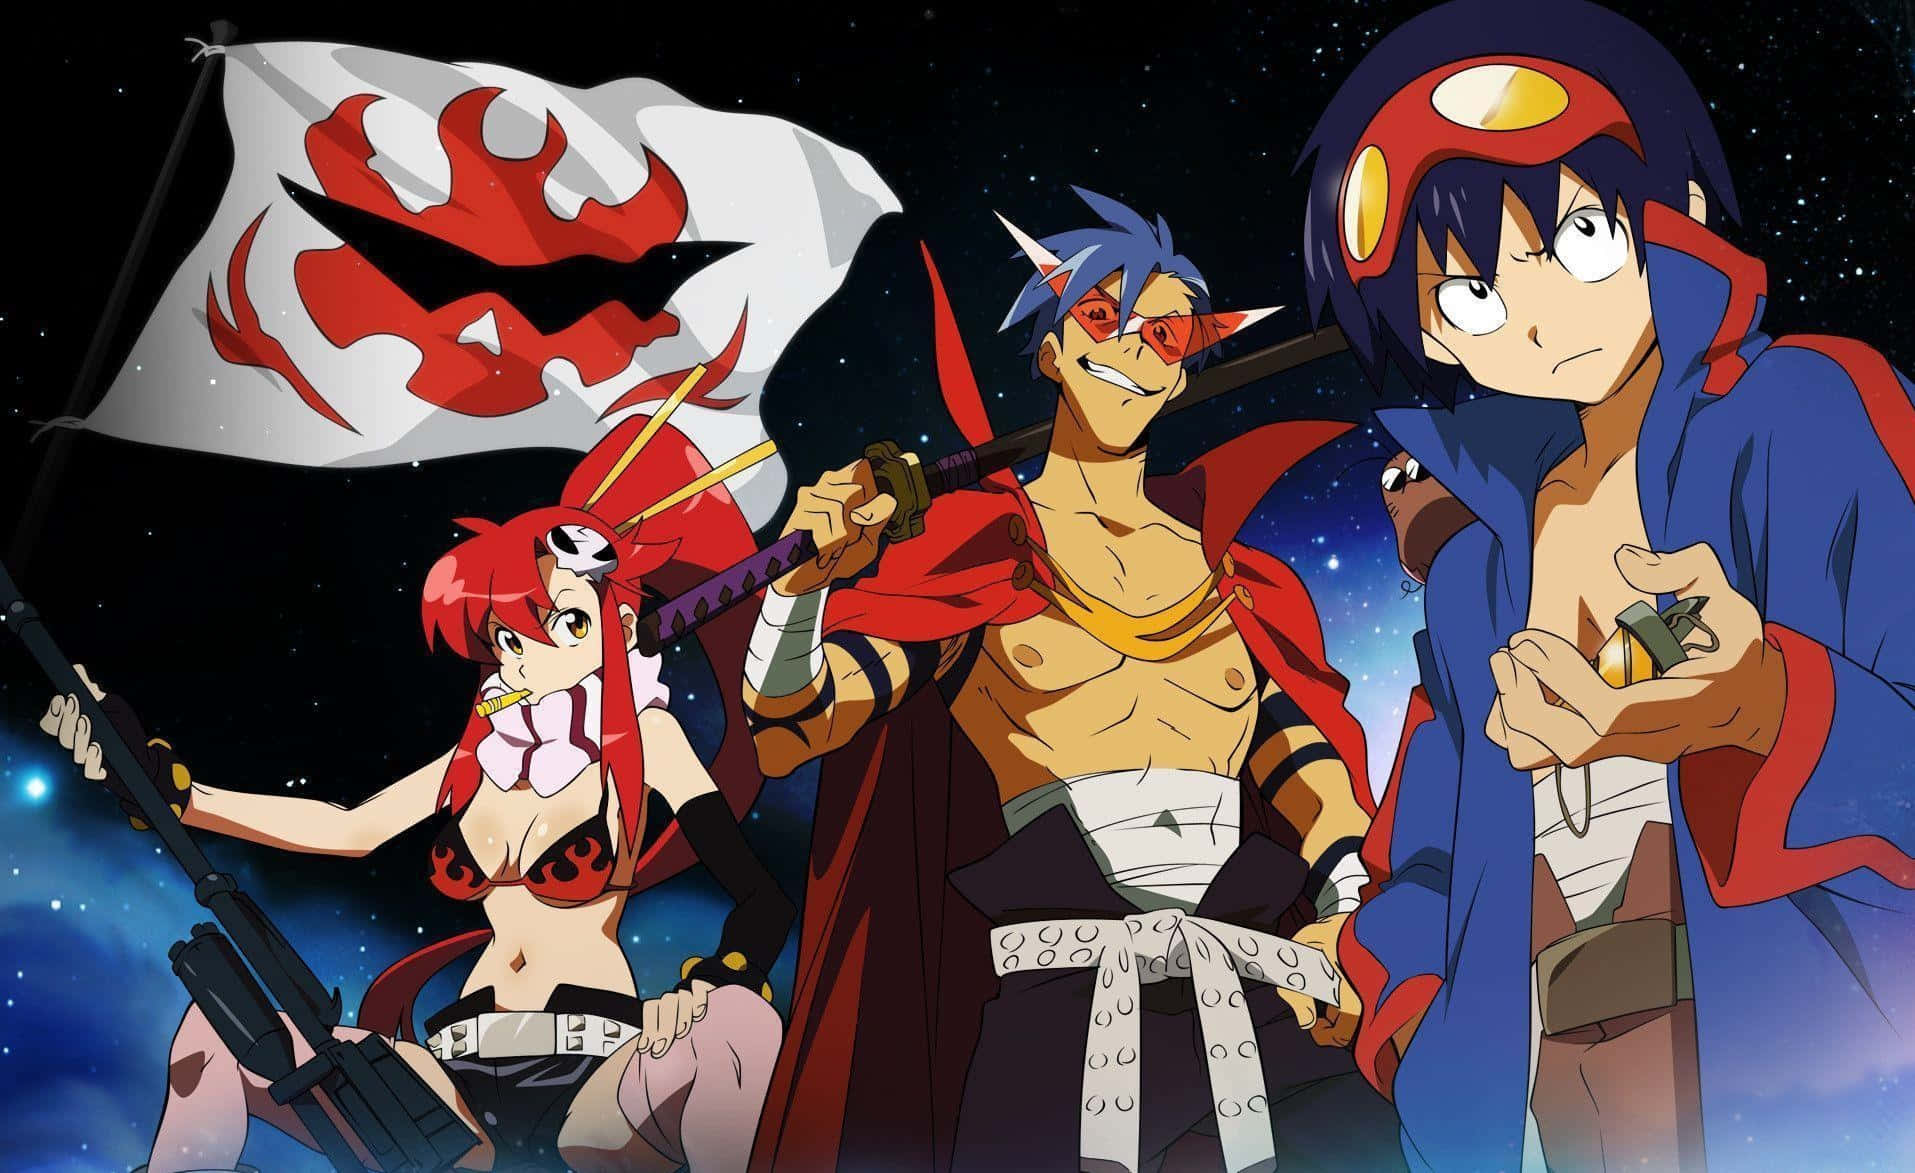 Gurren Lagann: "By Your Drill, We Create Our Own Future"